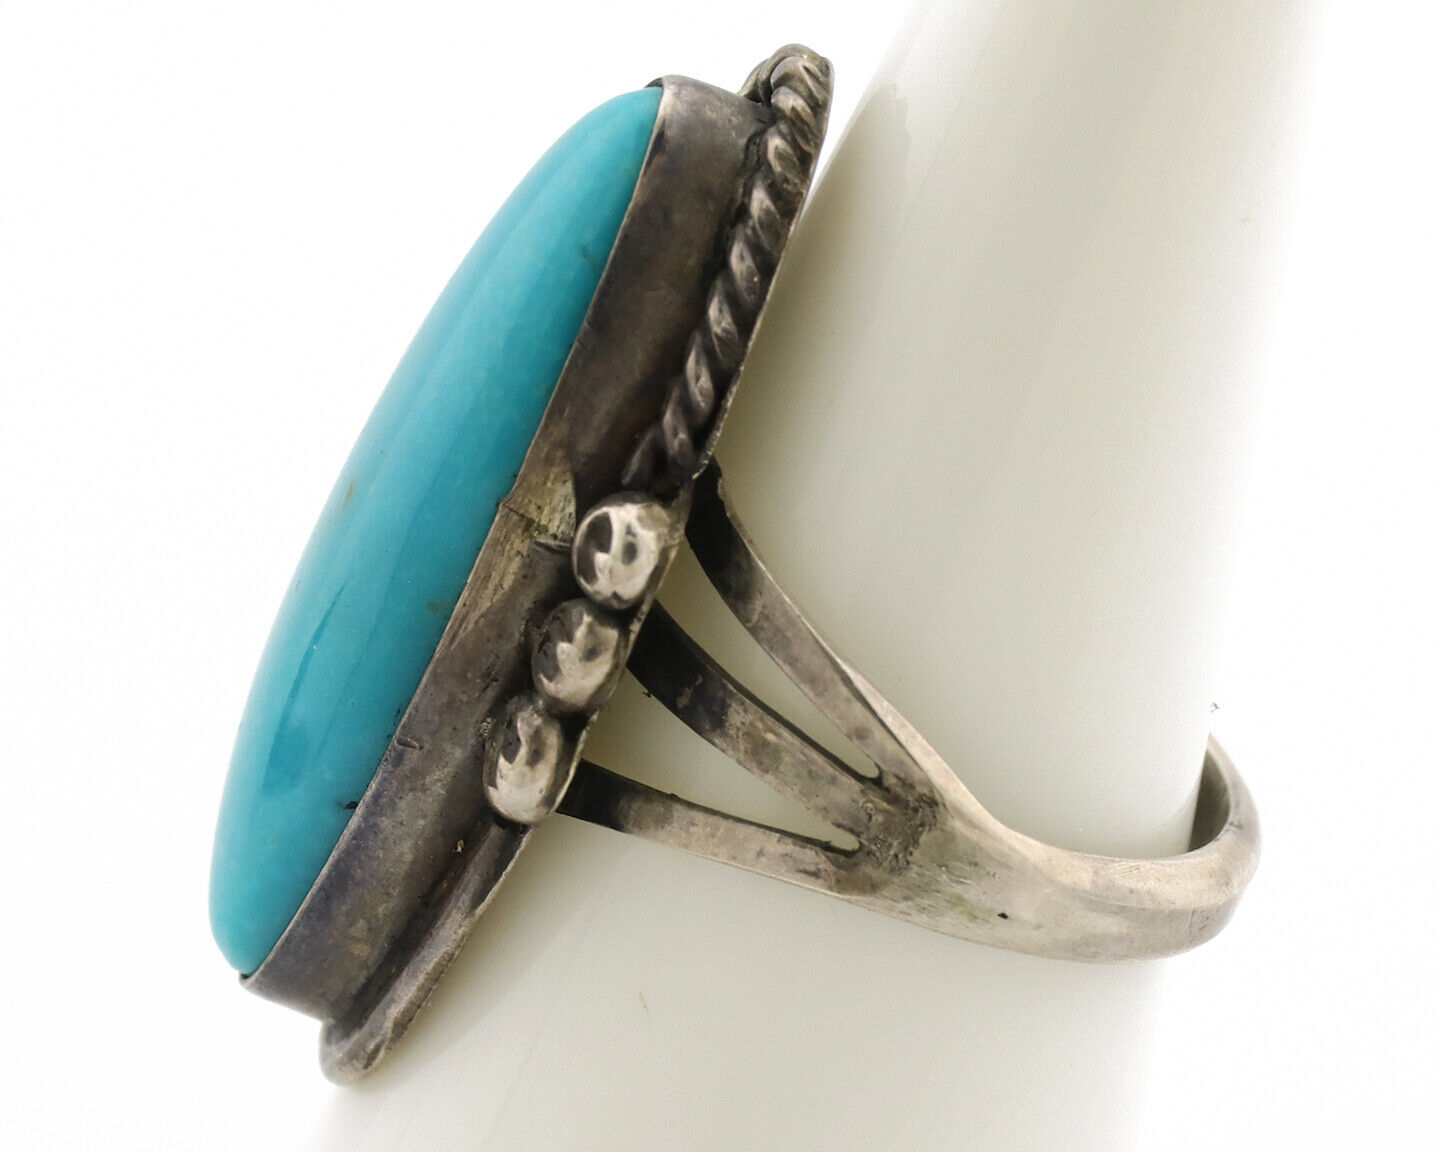 Navajo Ring .925 Silver Sleeping Beauty Turquoise Native American Artist C.1980s